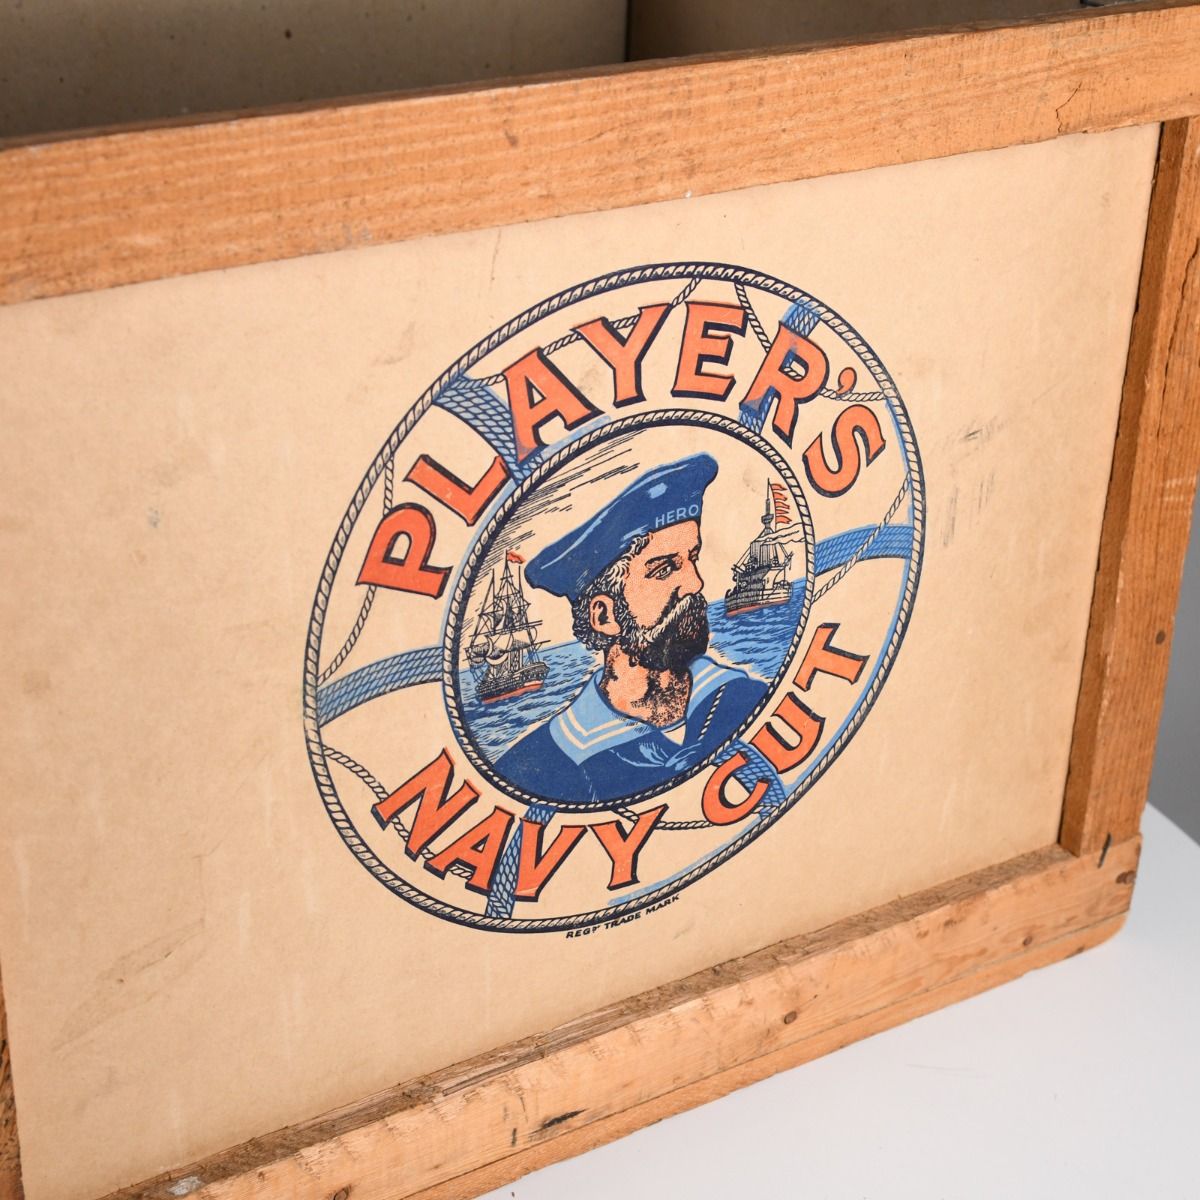 Vintage 1950s Player's Cigarettes Wooden Crate